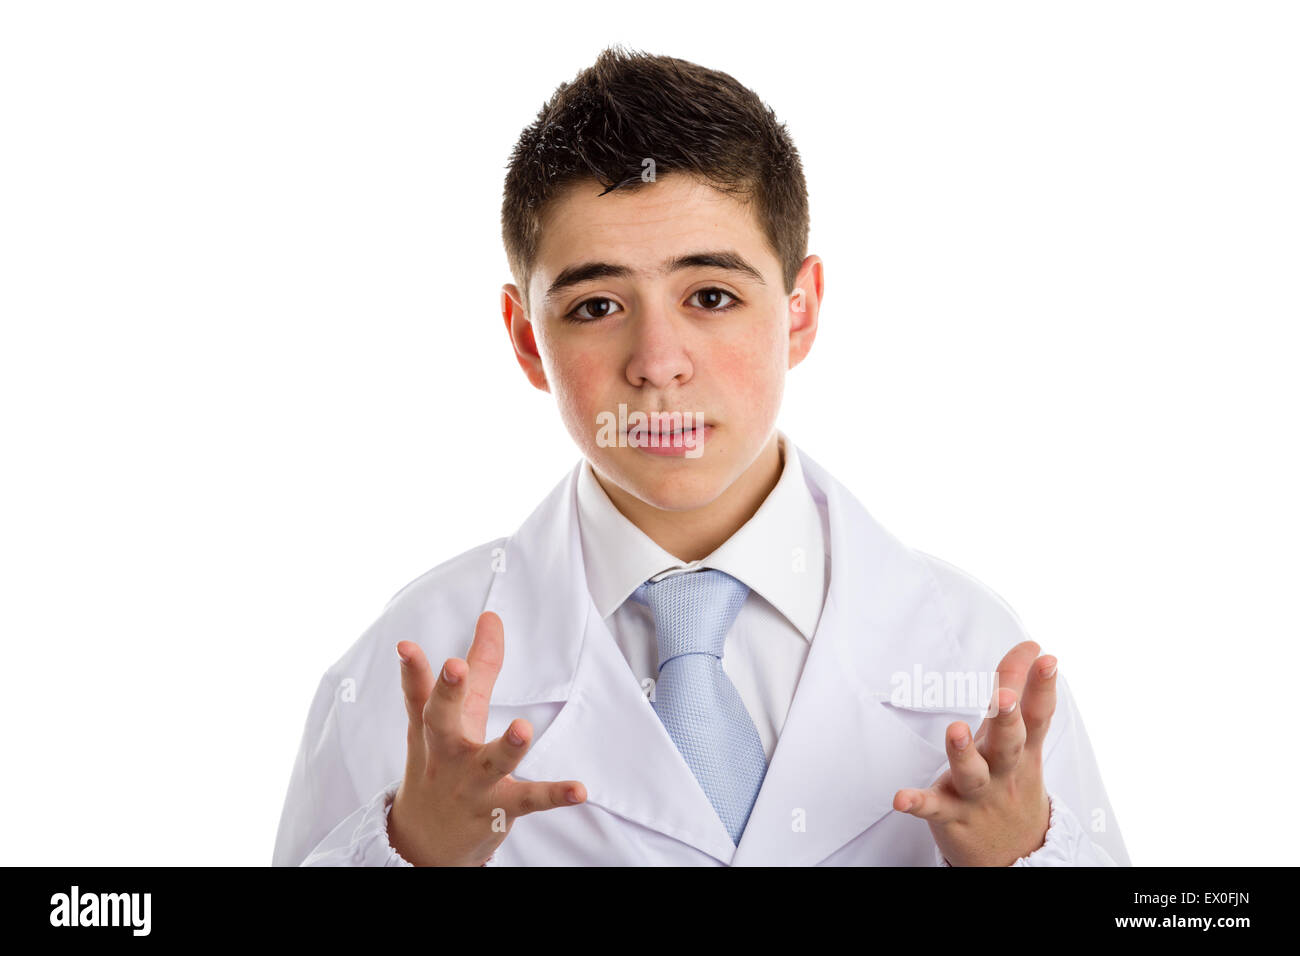 A boy doctor in blue tie and white coat helps to feel medicine more friendly: Palms are facing one another as holding a basketball. His gesture means control of the situation. Stock Photo